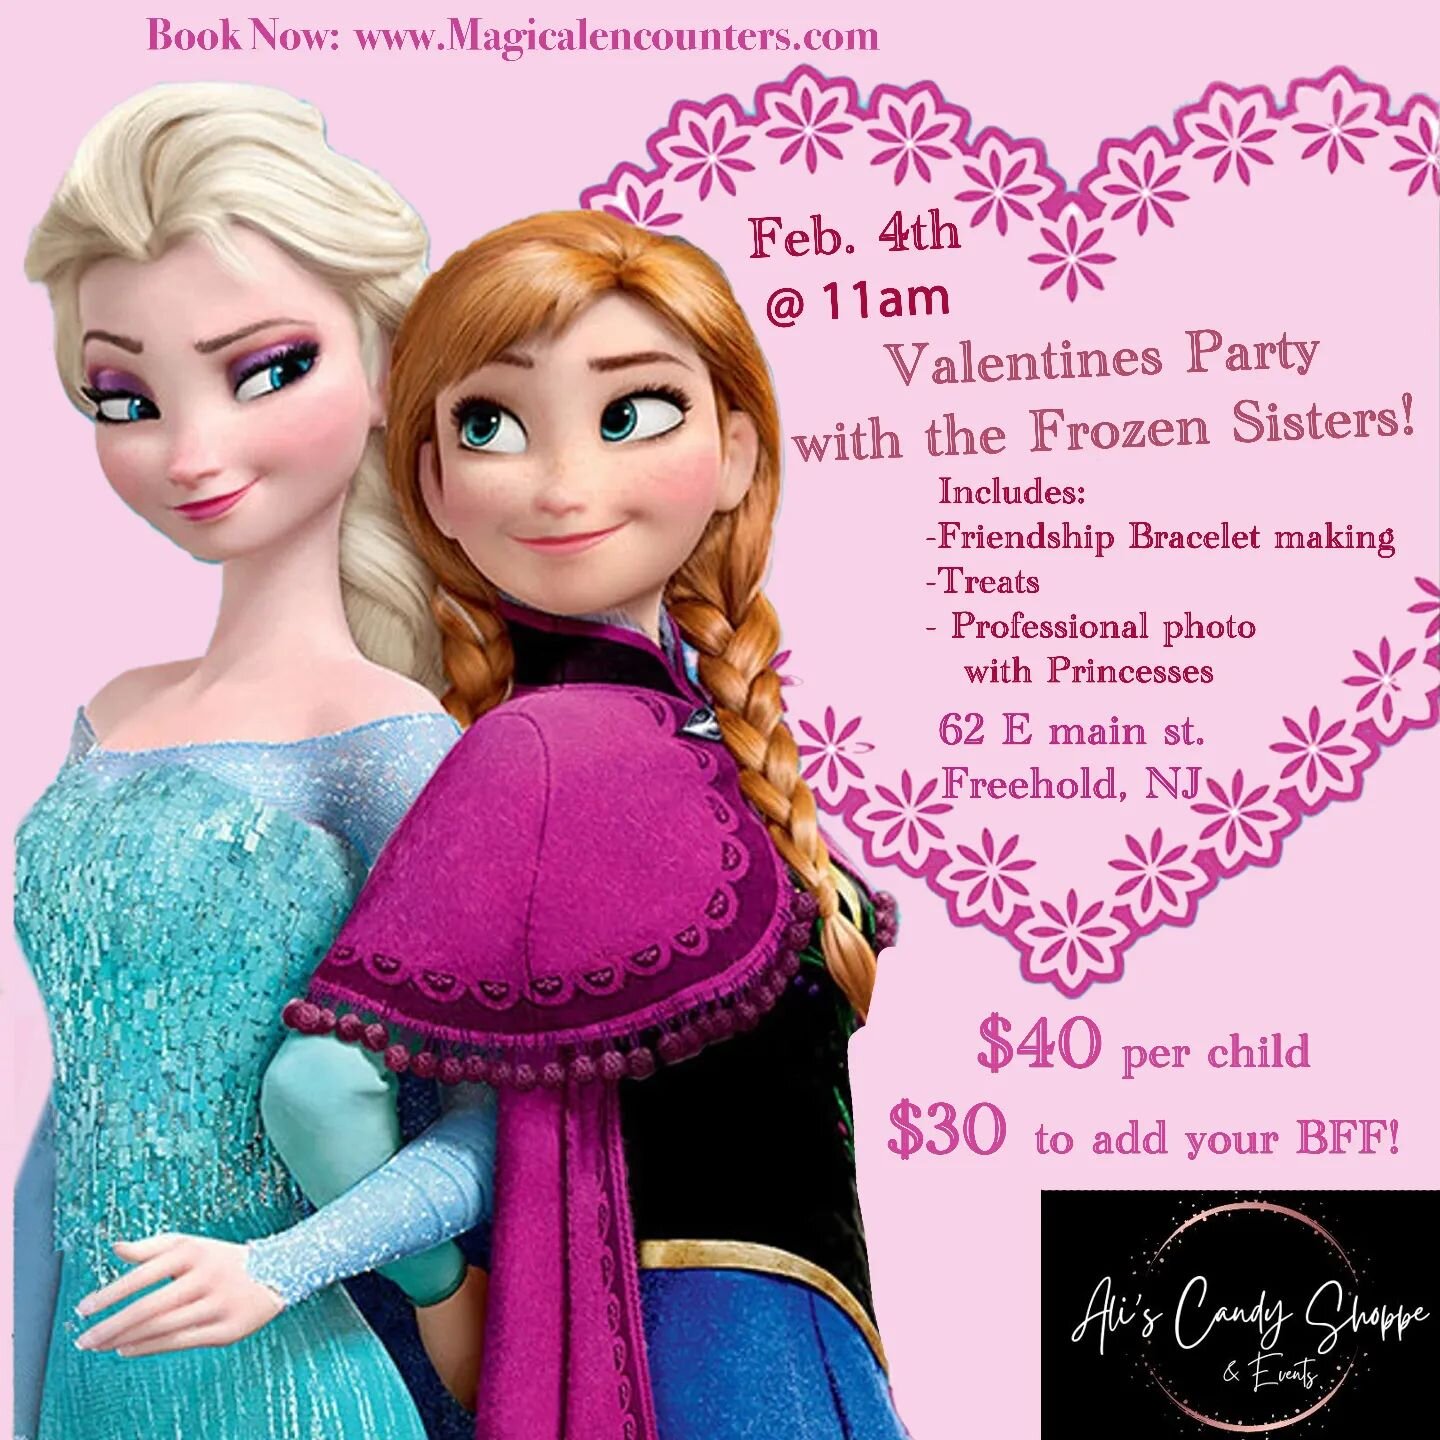 Happy Snow day!!! Nothing melts a frozen heart like LOVE &amp; FRIENDSHIP💗 Join the Princesses of @aliscandyshoppe for a fun Valentines themed event on Sunday February 4th, 11am! Bring your BFF, sibling, or just bring yourself!!! We will have treats